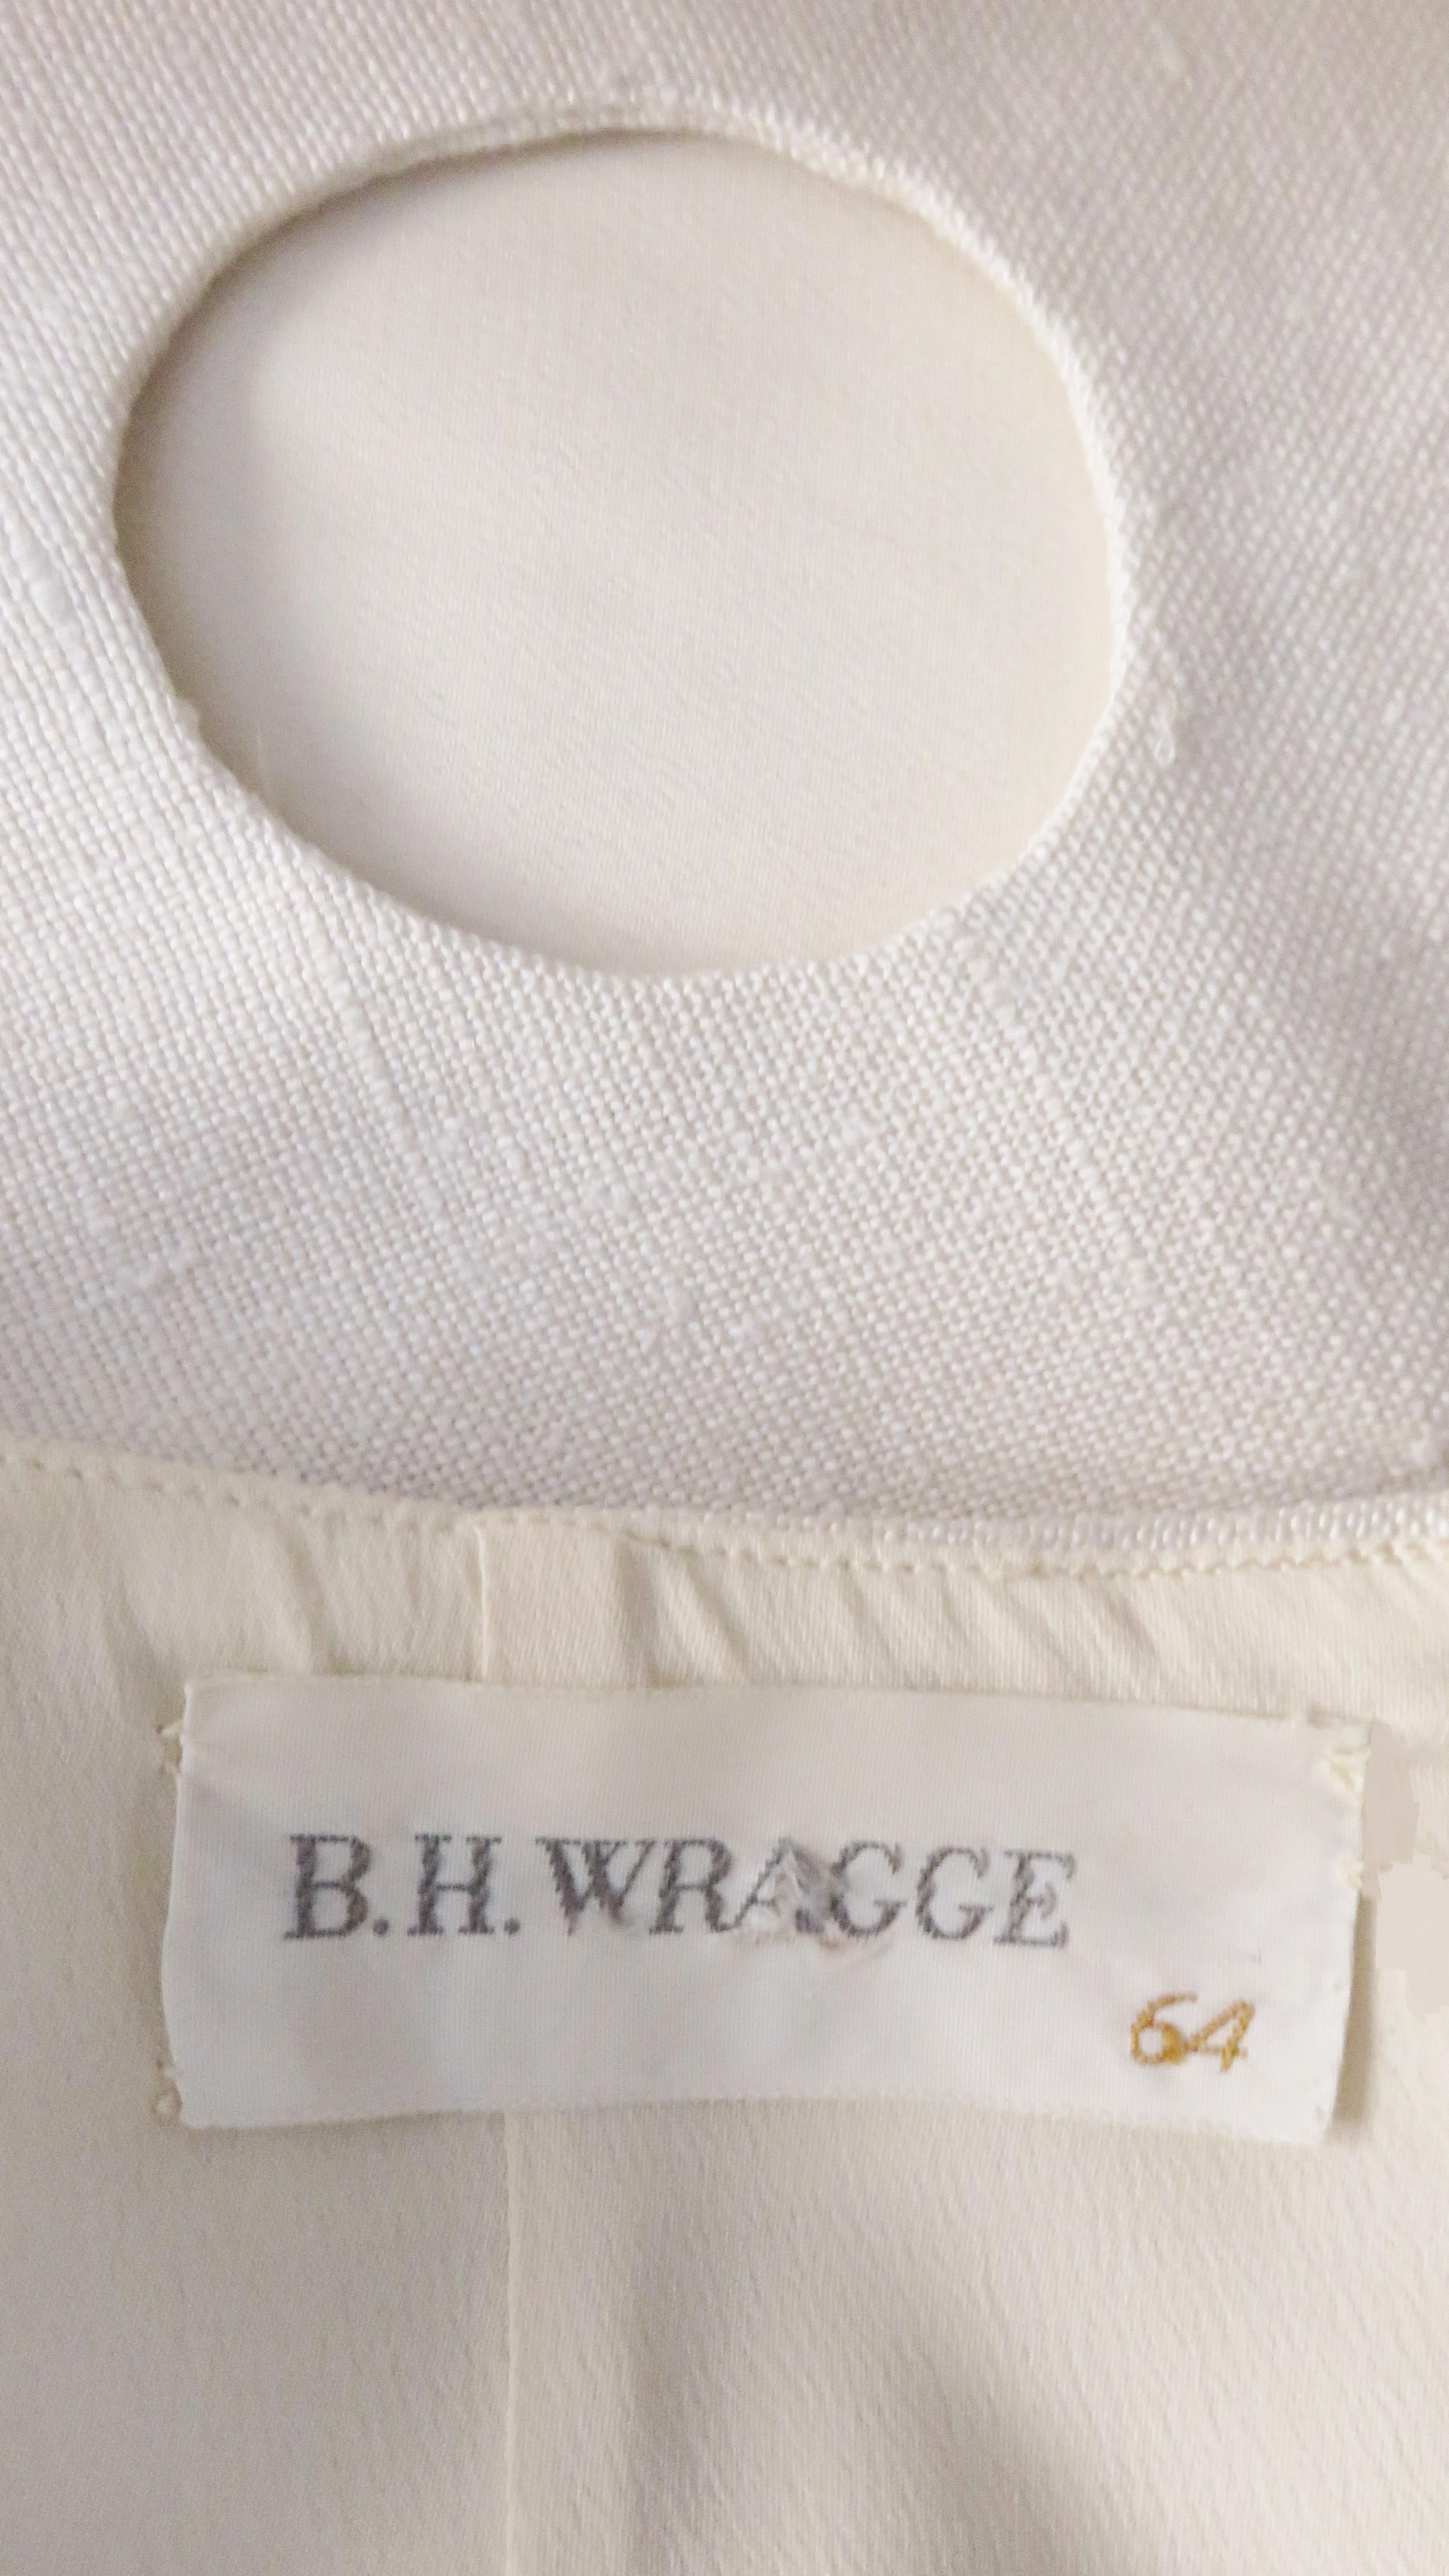 B H Wragge Linen Skirt and Top with Circle Cut outs 1964 For Sale 10